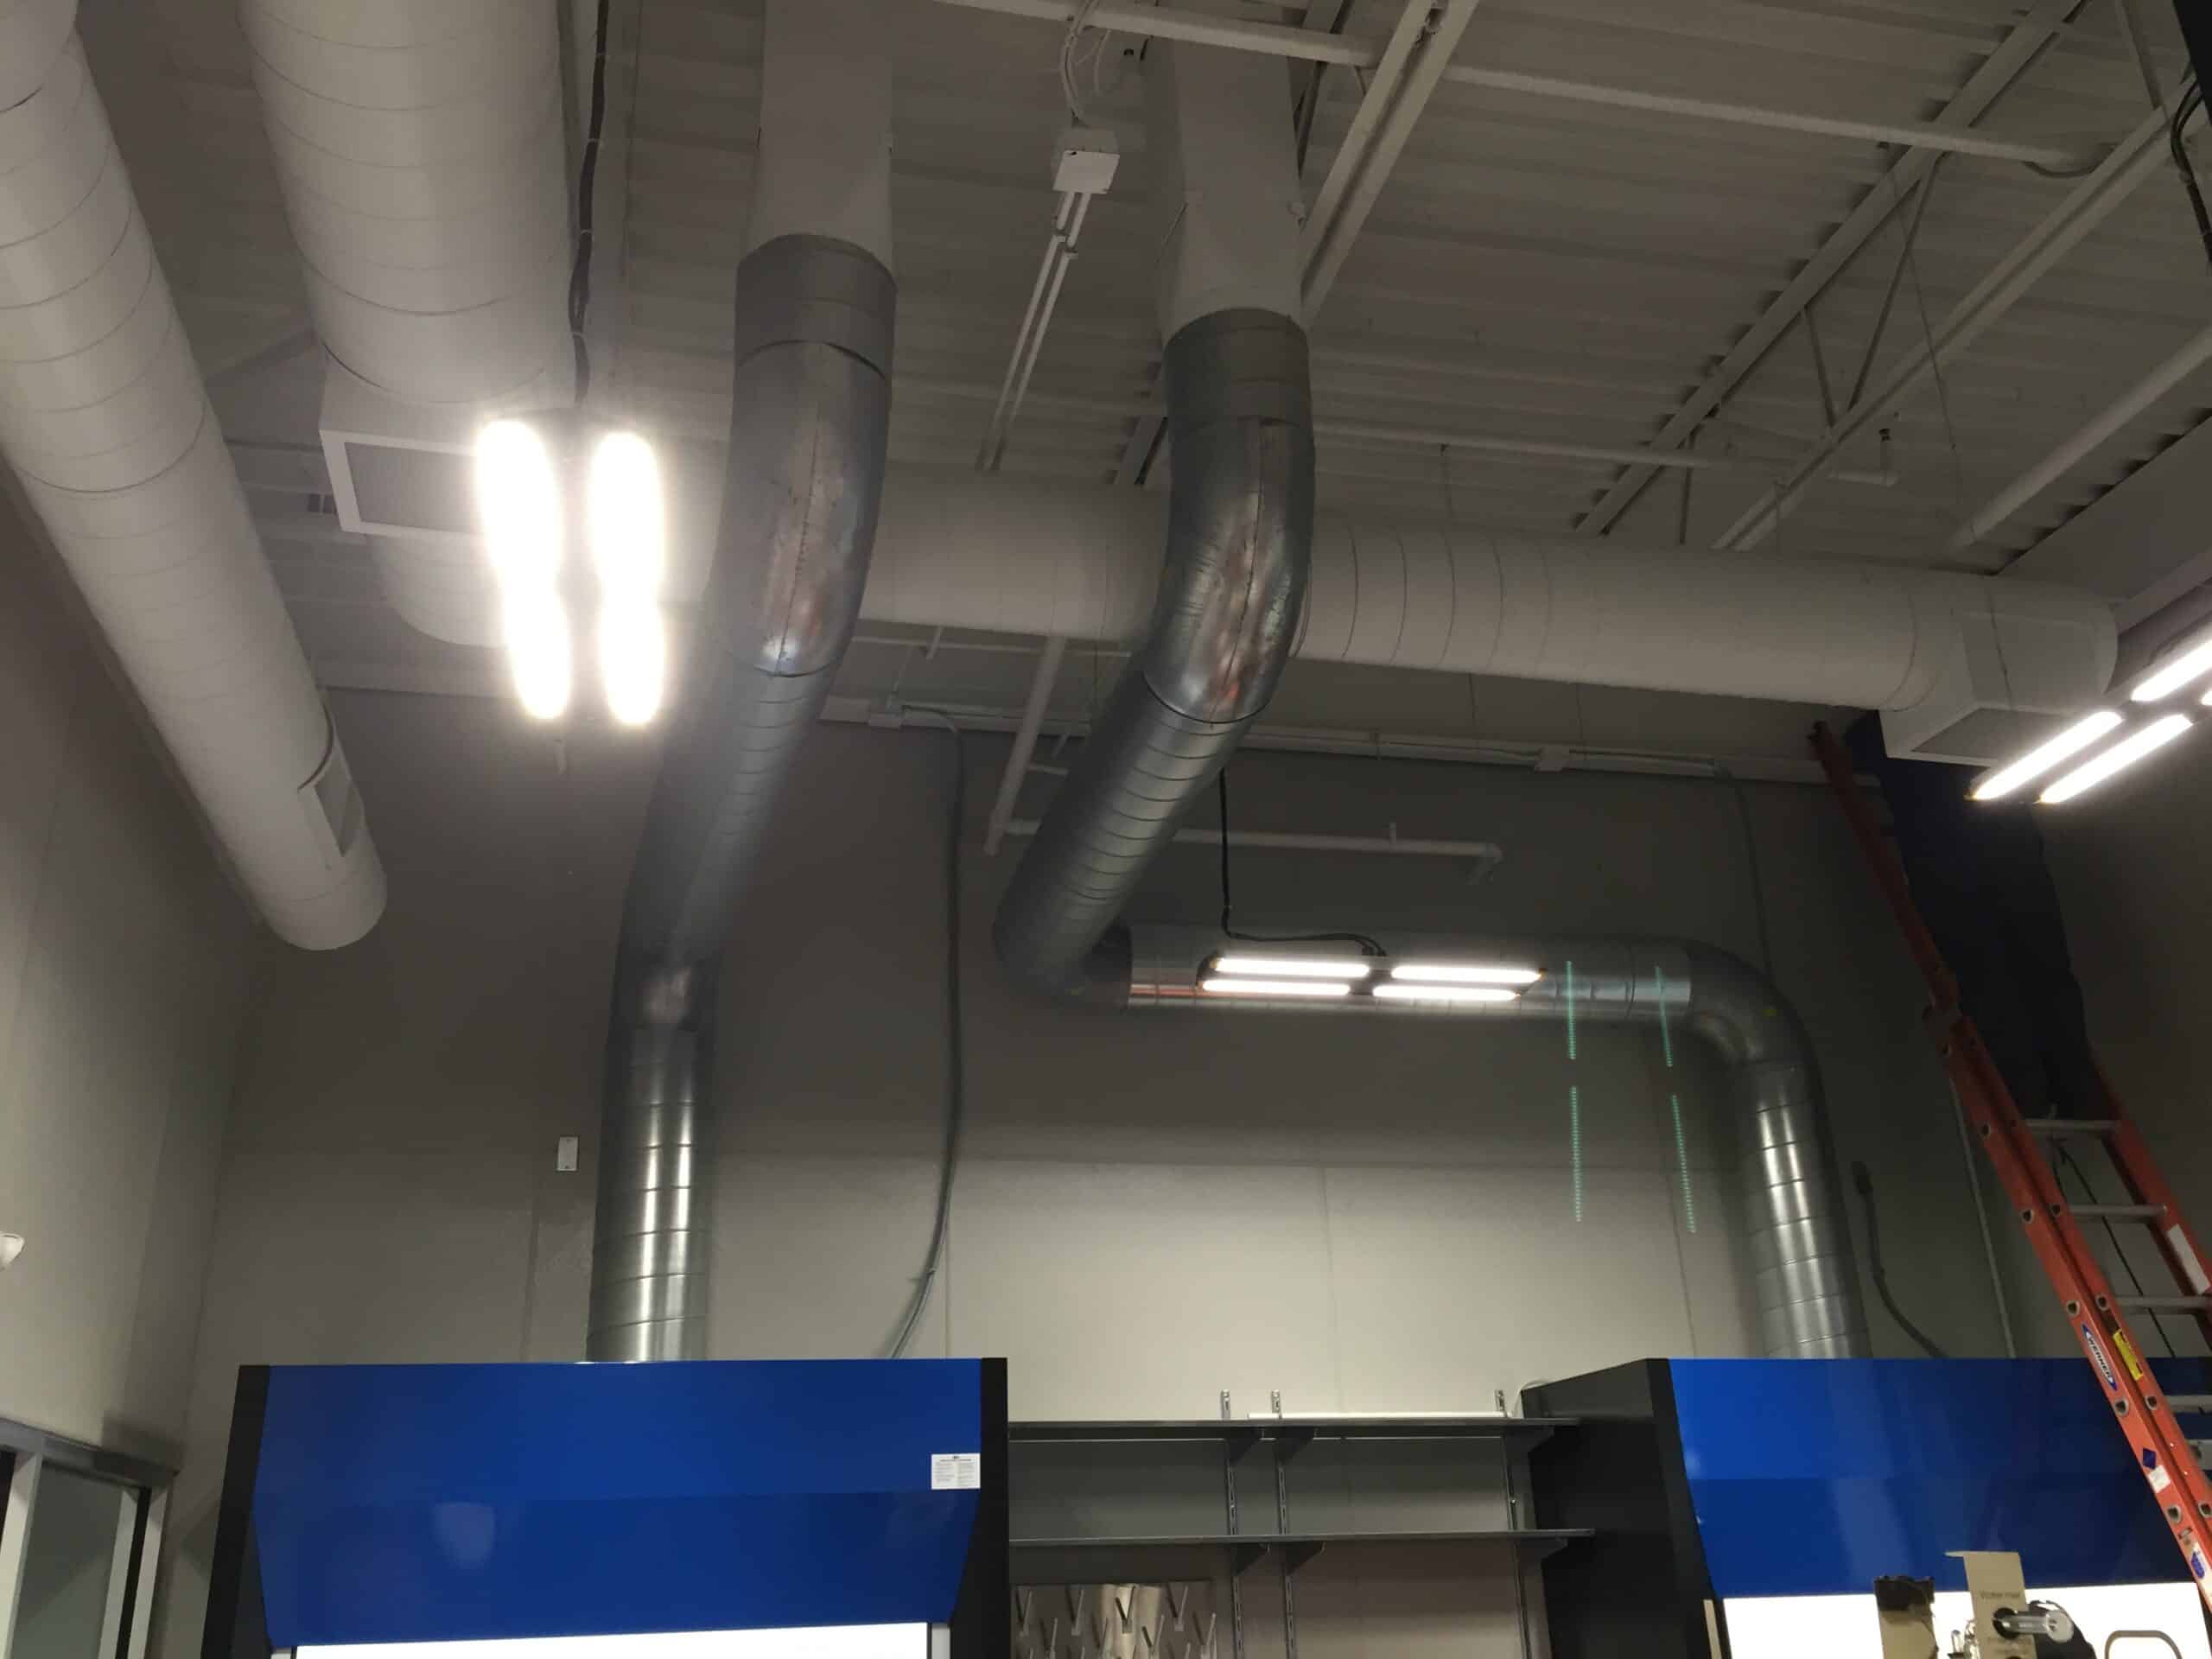 A room with ductwork and pipes in the ceiling.